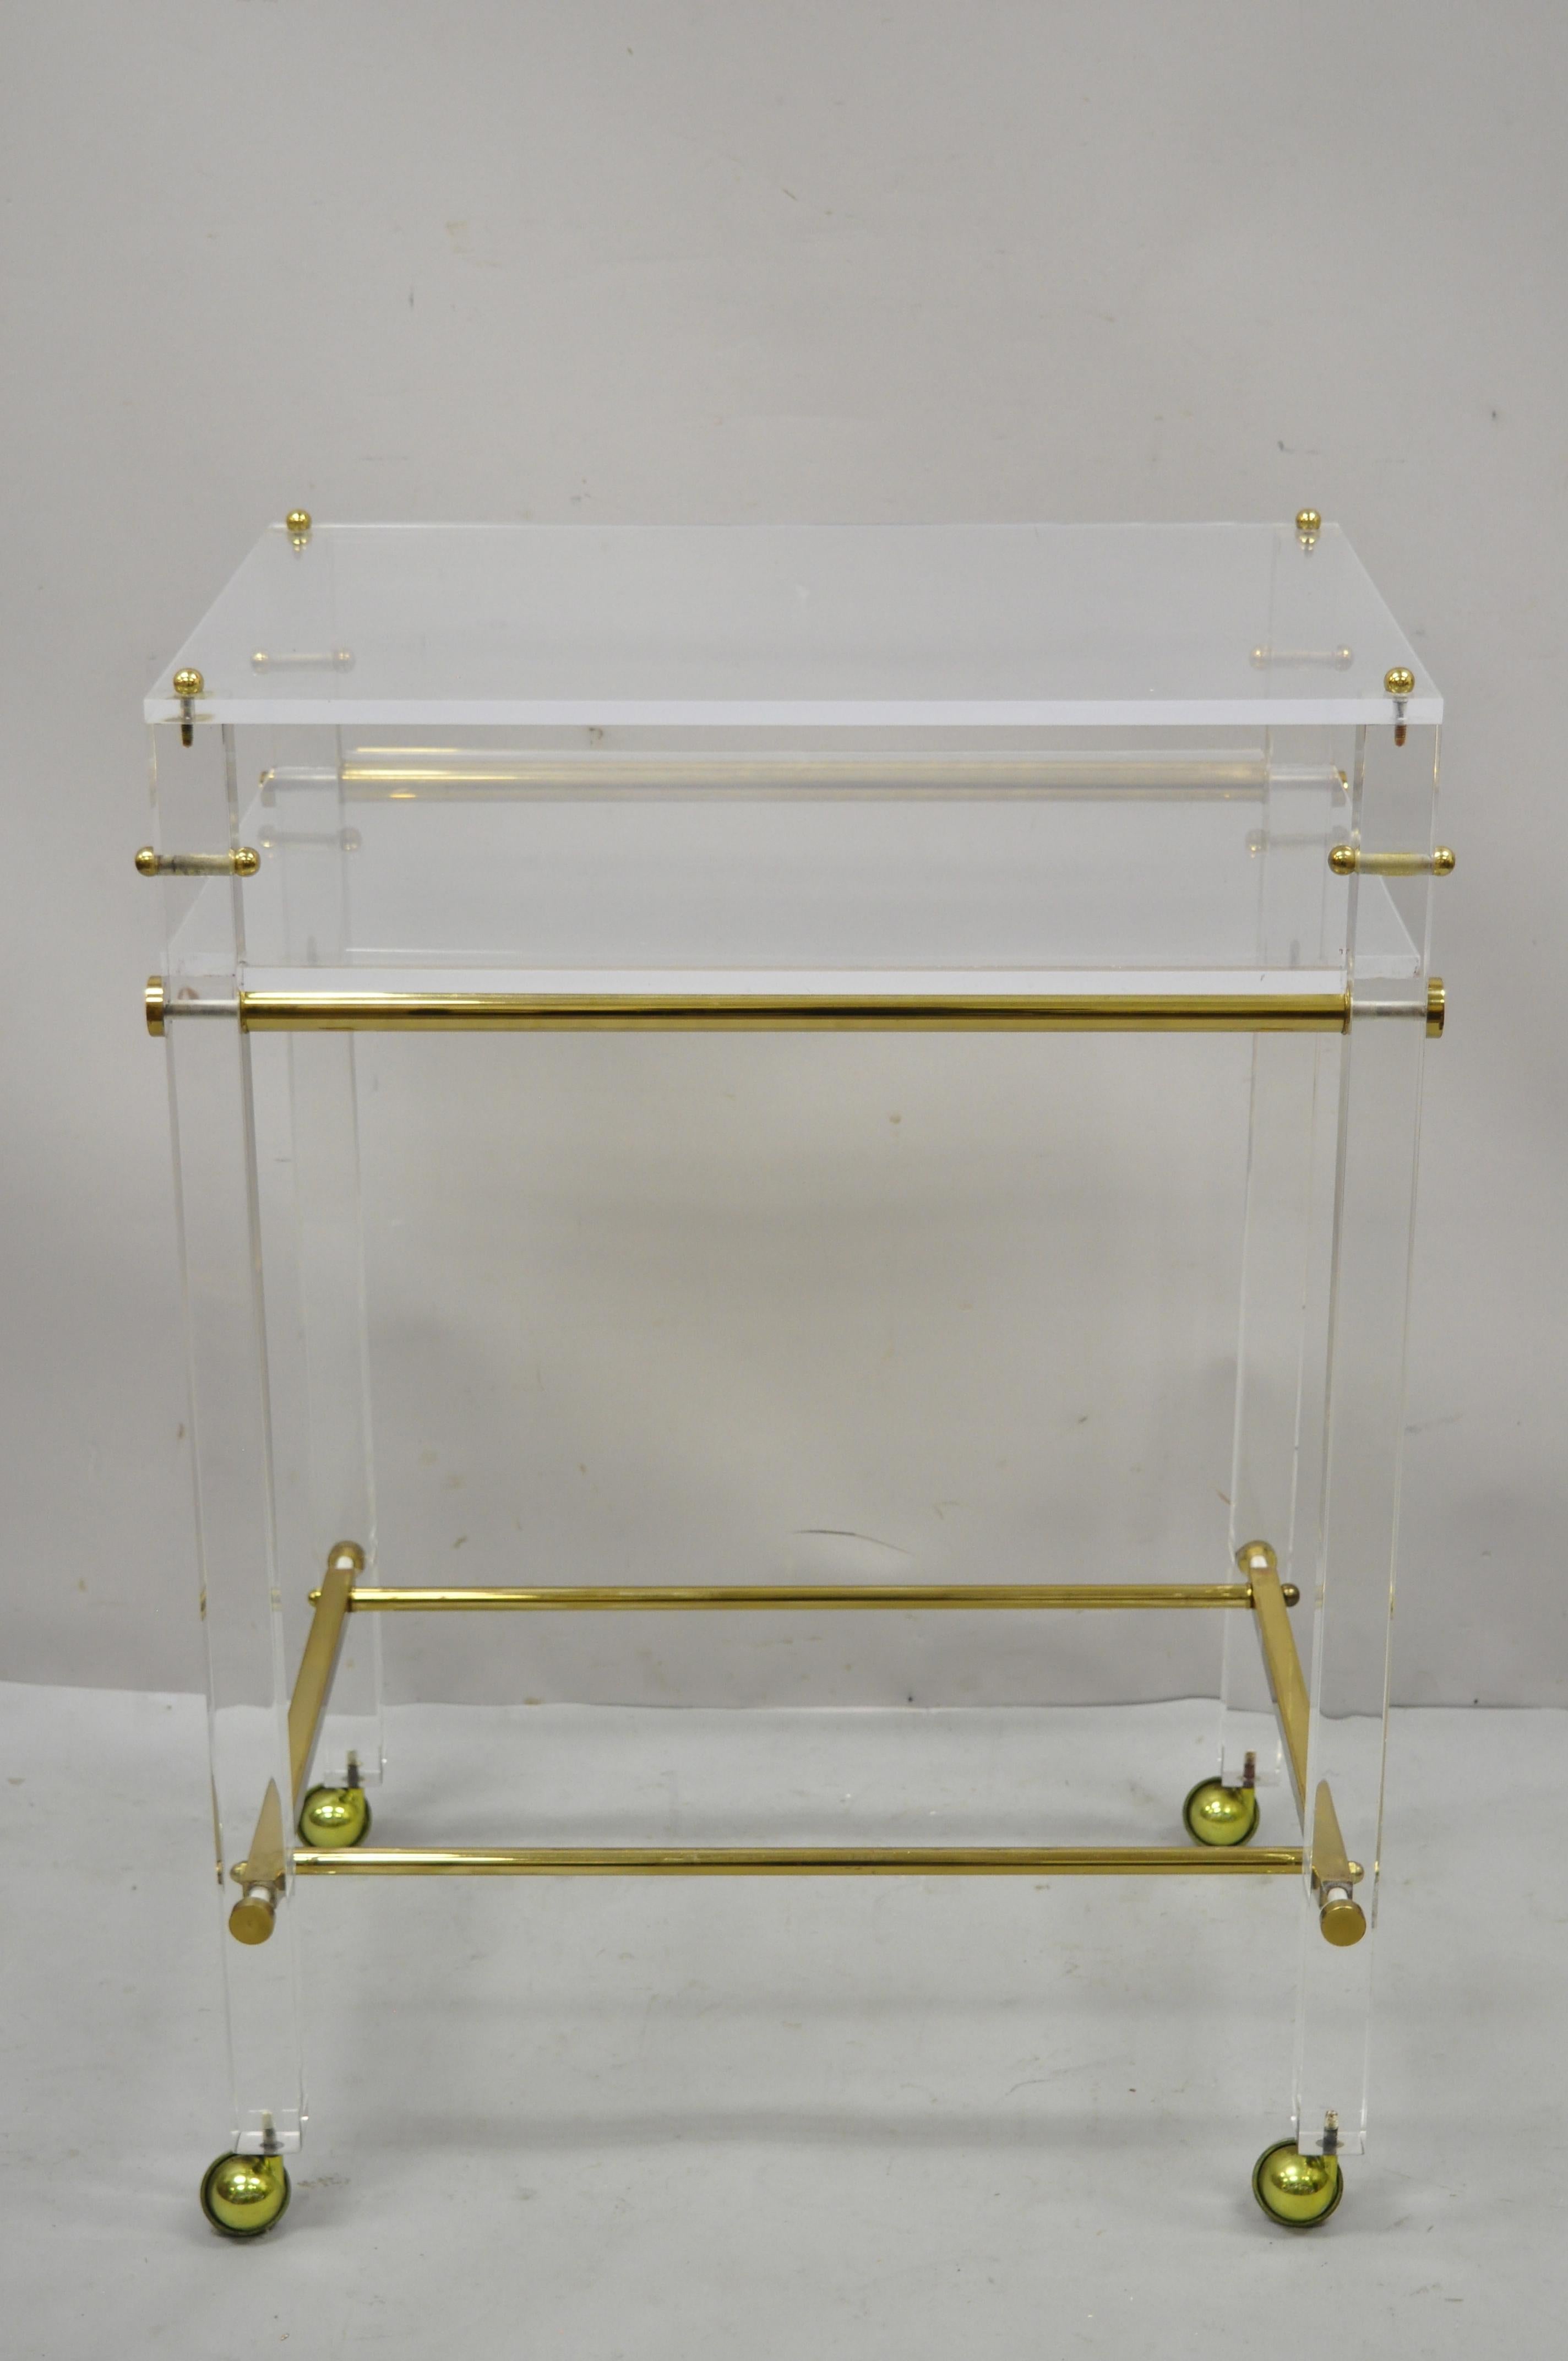 Lucite and brass mid century modern rolling bar cart trolley tea table stand. Item features brass stretcher base, rolling casters, lucite upper level with shelf, clean modernist lines, great style and form. Circa mid to late 20th